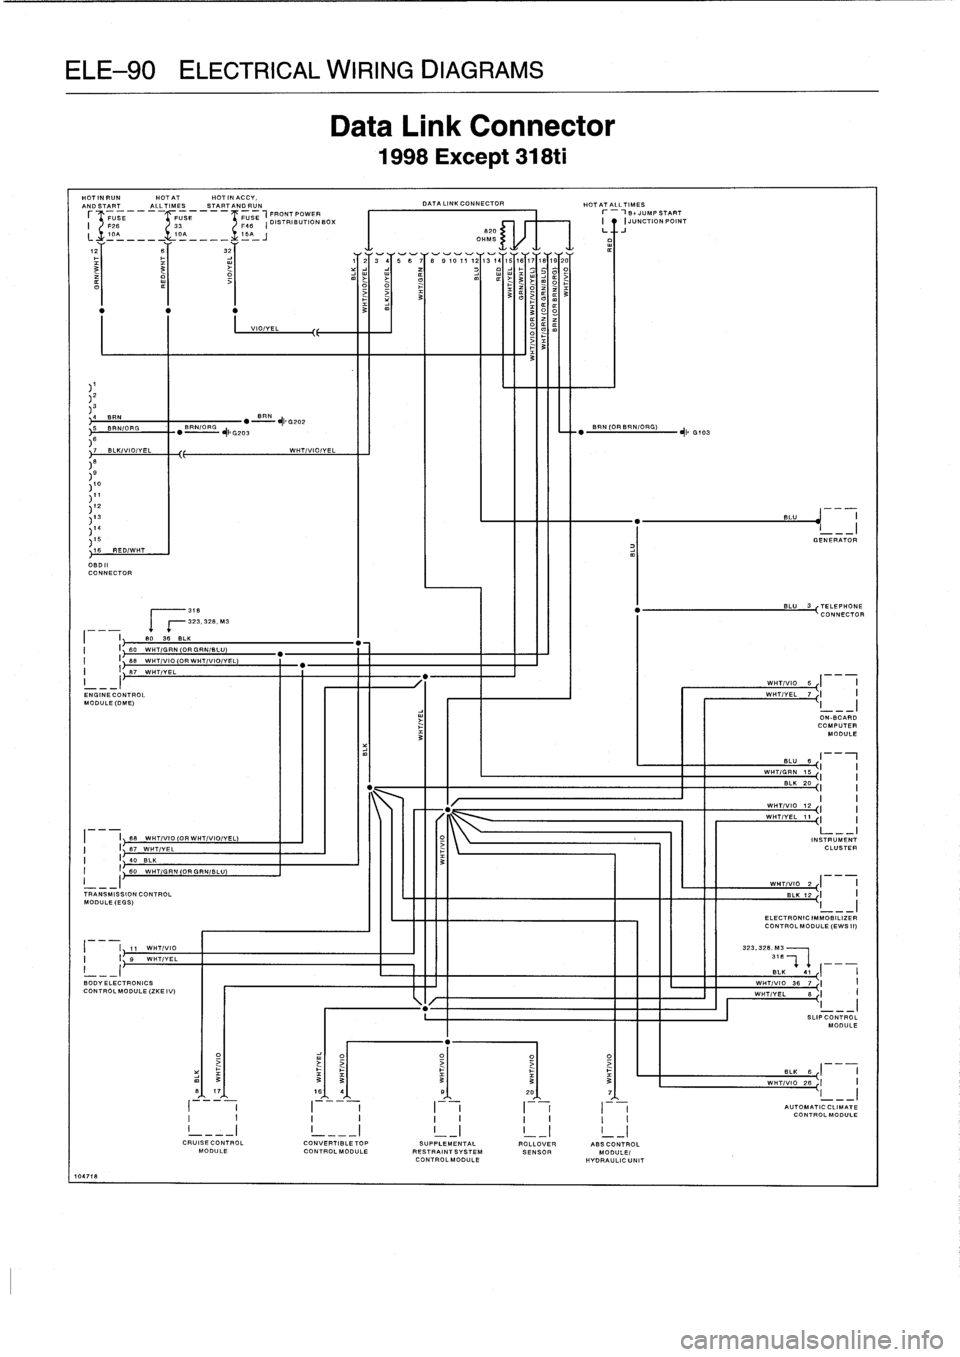 BMW 325i 1998 E36 Service Manual 
ELE-90
ELECTRICAL
WIRING
DIAGRAMS

HOTINRUN

	

HOT
AT

	

HOT
IN
ACCY,
AND7SIlTART

	

ALLTI-I-,
MES

	

START~A
.
NORUN
I
FUSE

	

USE

	

+
FUSE,
FRONTPOWER
I

	

/
F26

	

)
33

	

/
F46

	

I
D